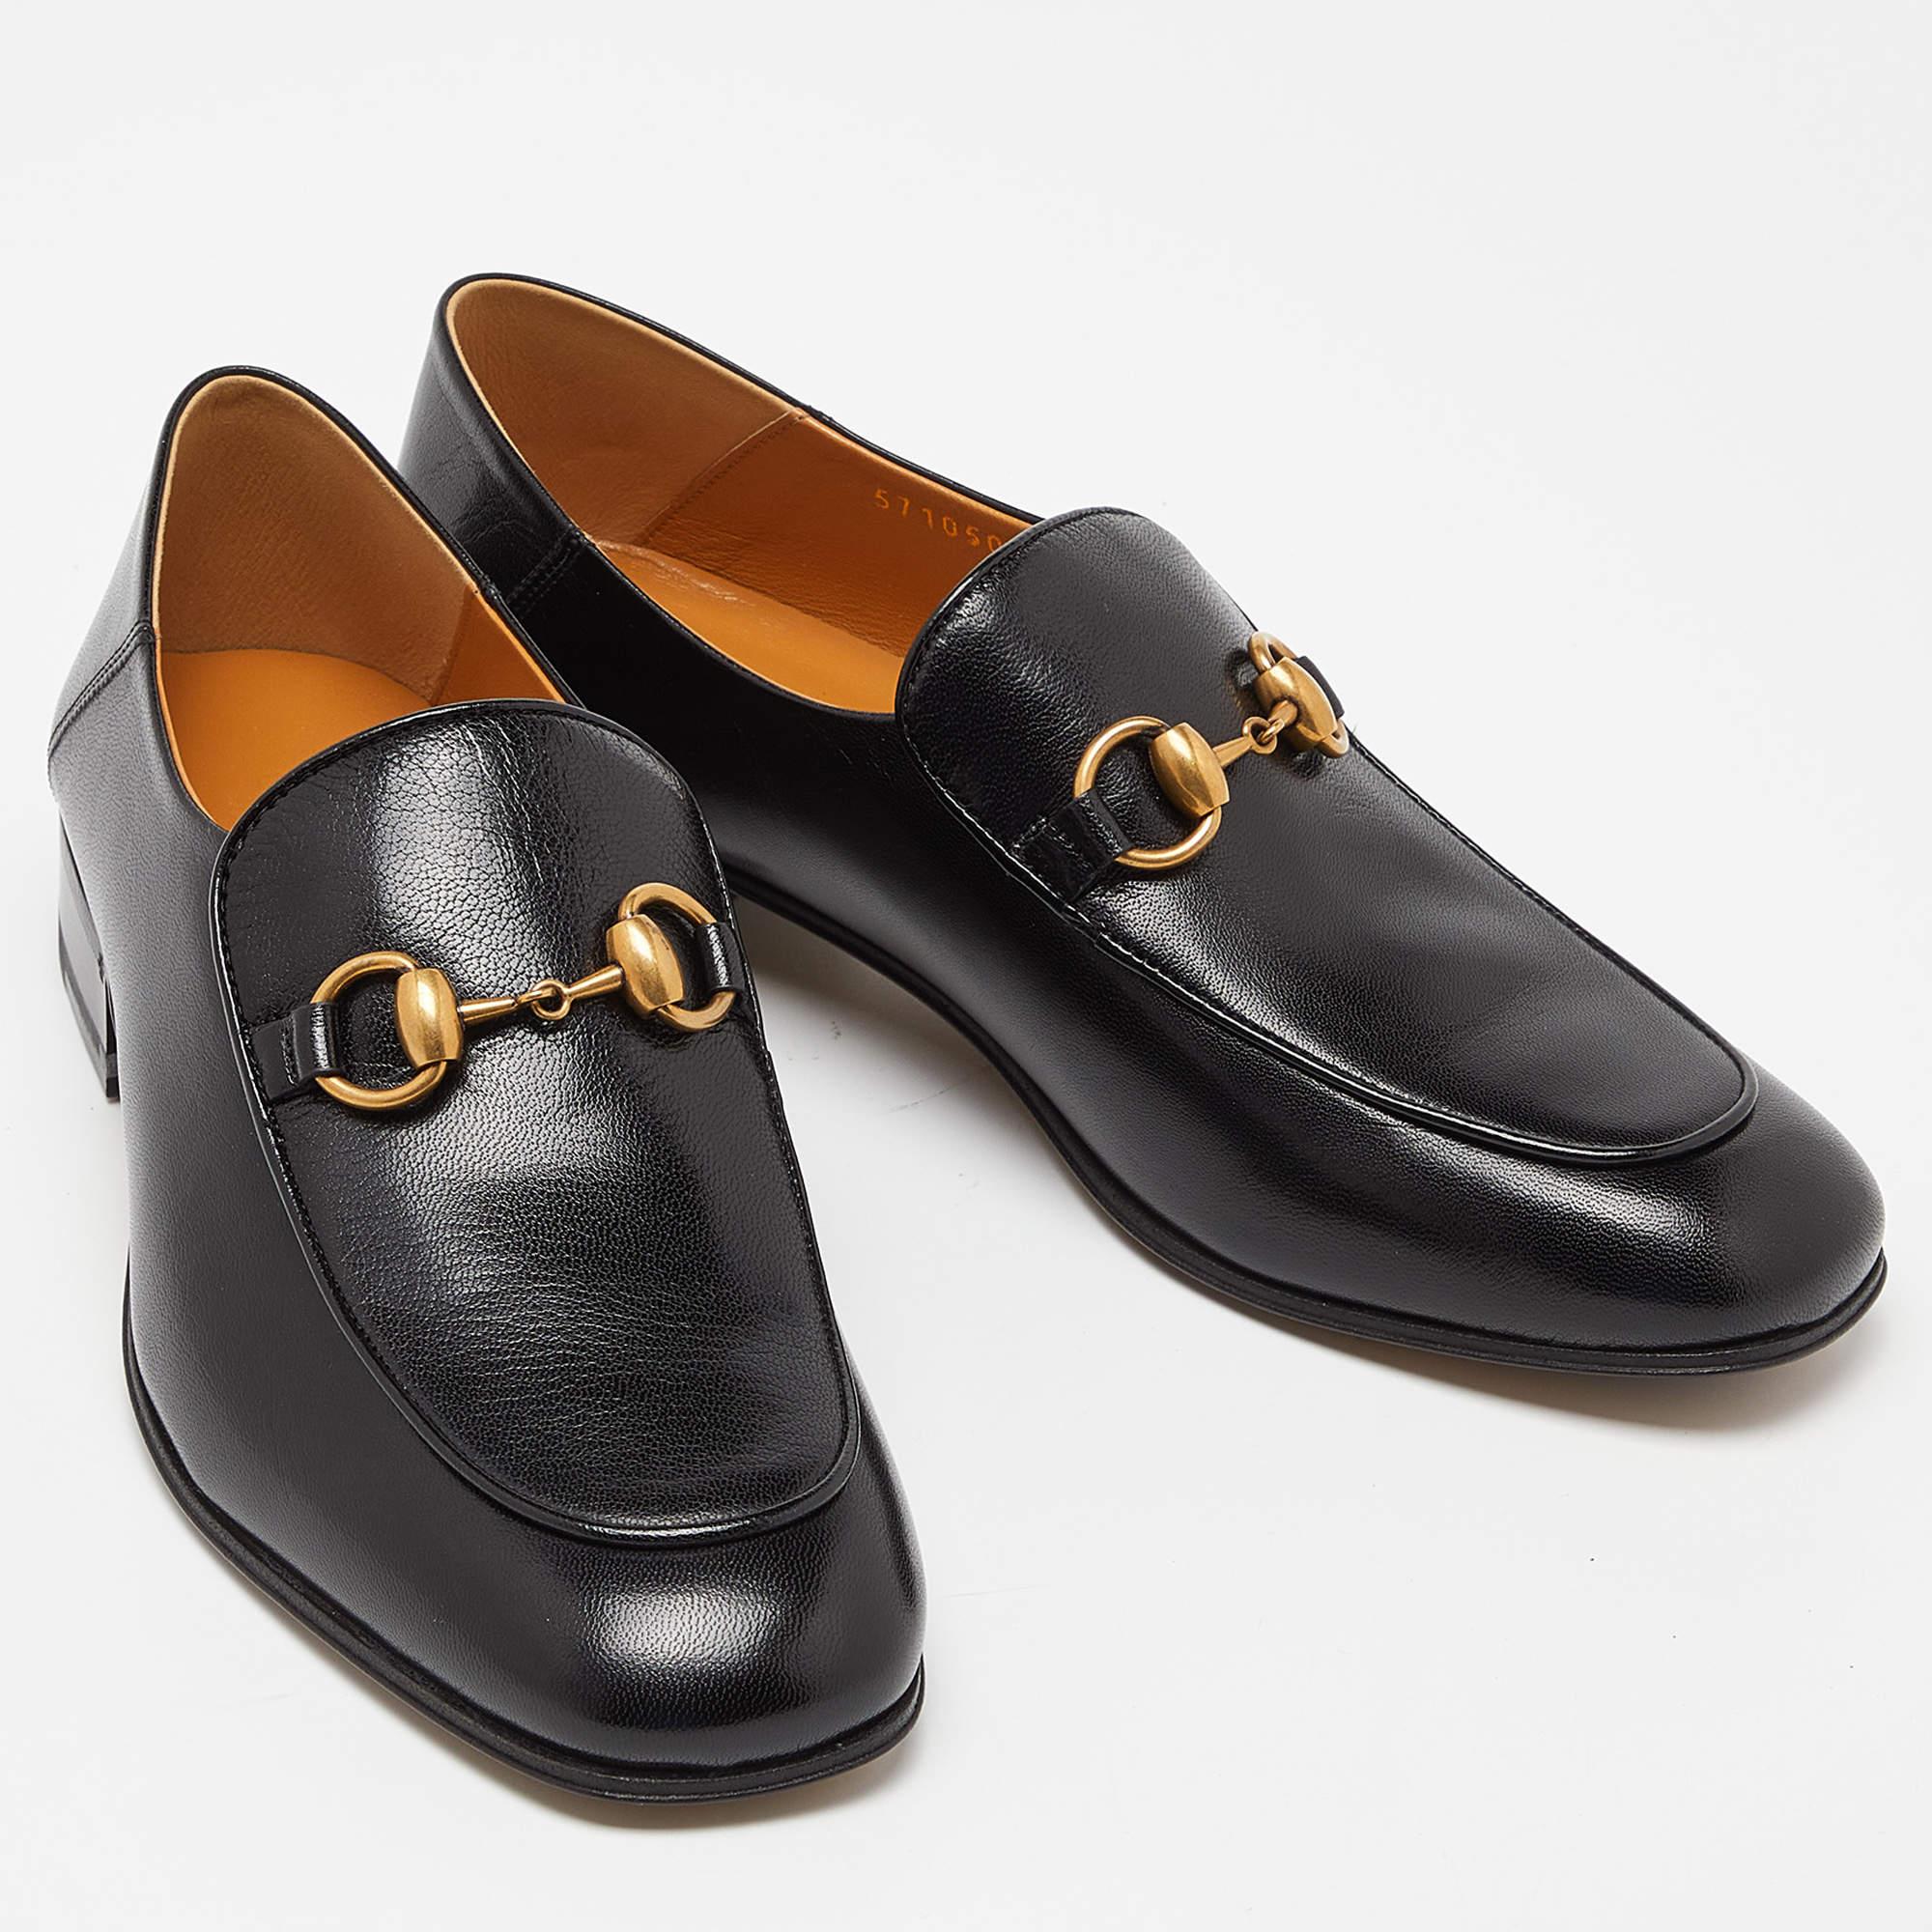 Gucci Black Leather Horsebit Loafers Size 38.5 For Sale 1